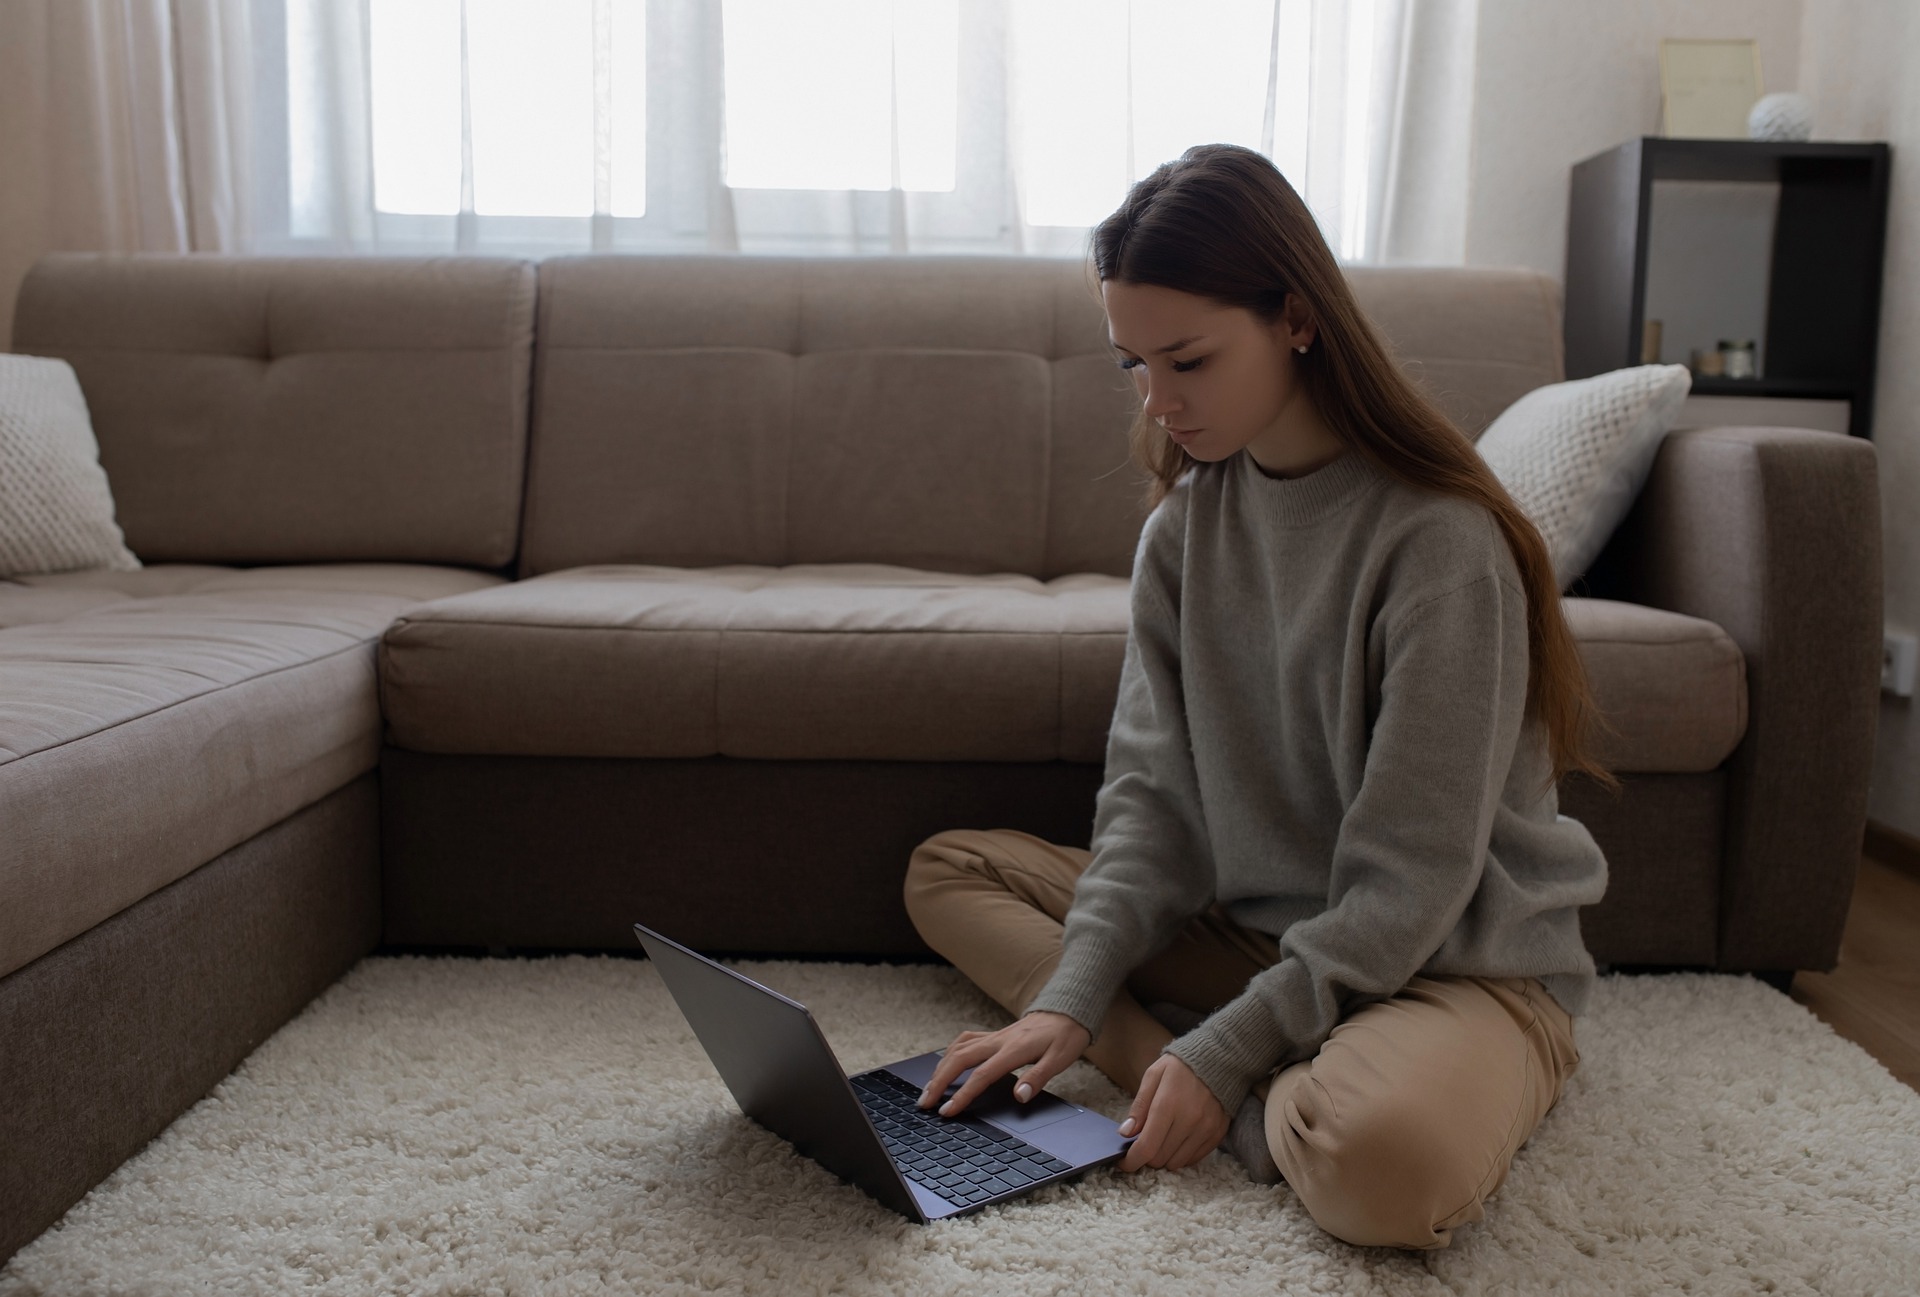 #WFH: Are You Connecting With the Other Person?